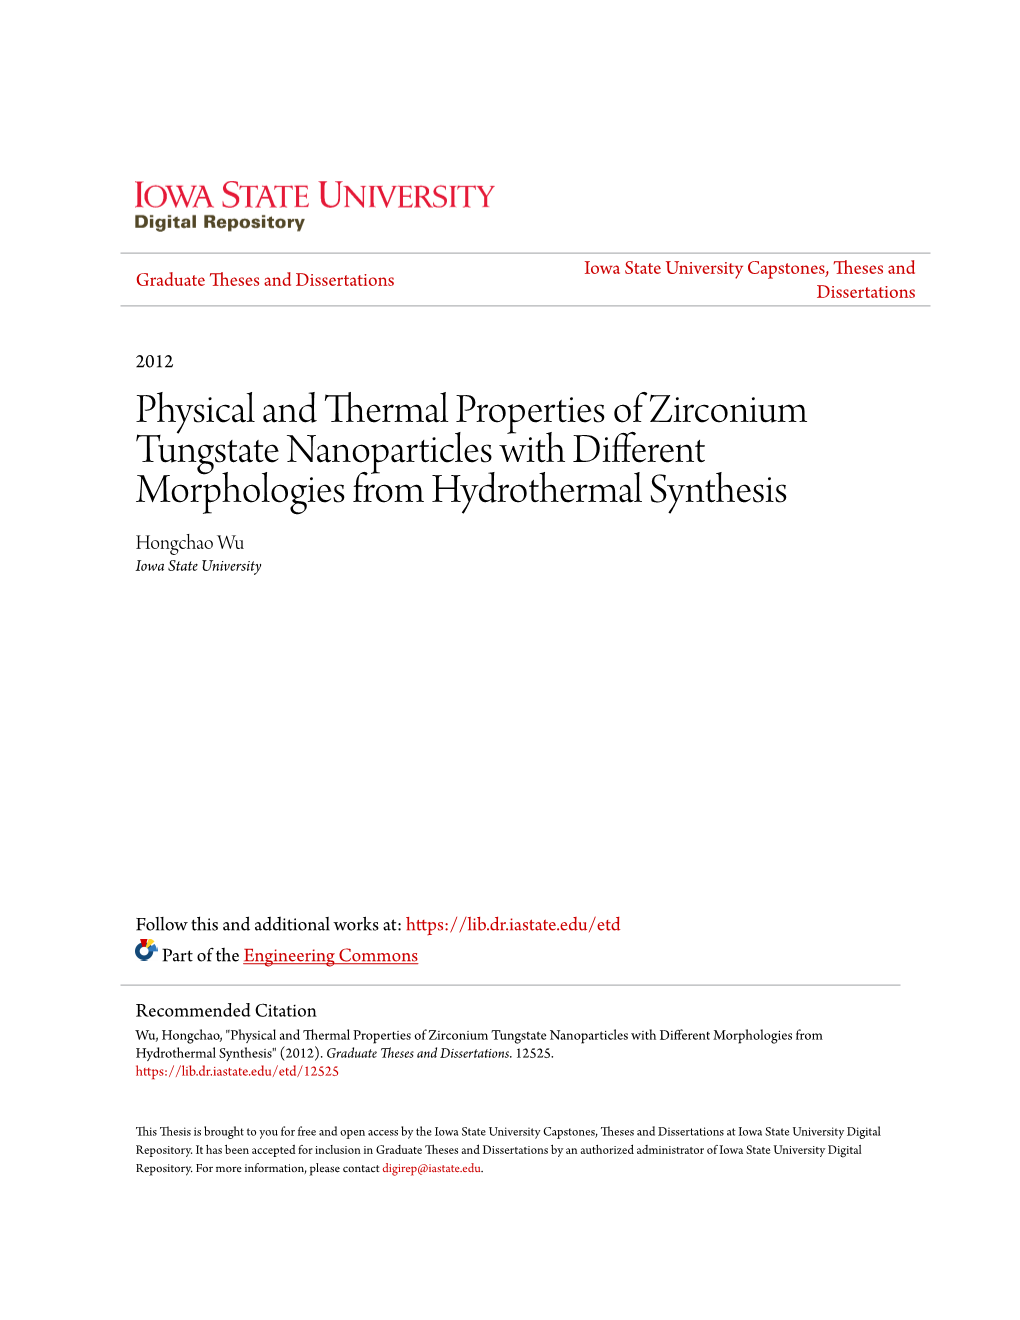 Physical and Thermal Properties of Zirconium Tungstate Nanoparticles with Different Morphologies from Hydrothermal Synthesis Hongchao Wu Iowa State University